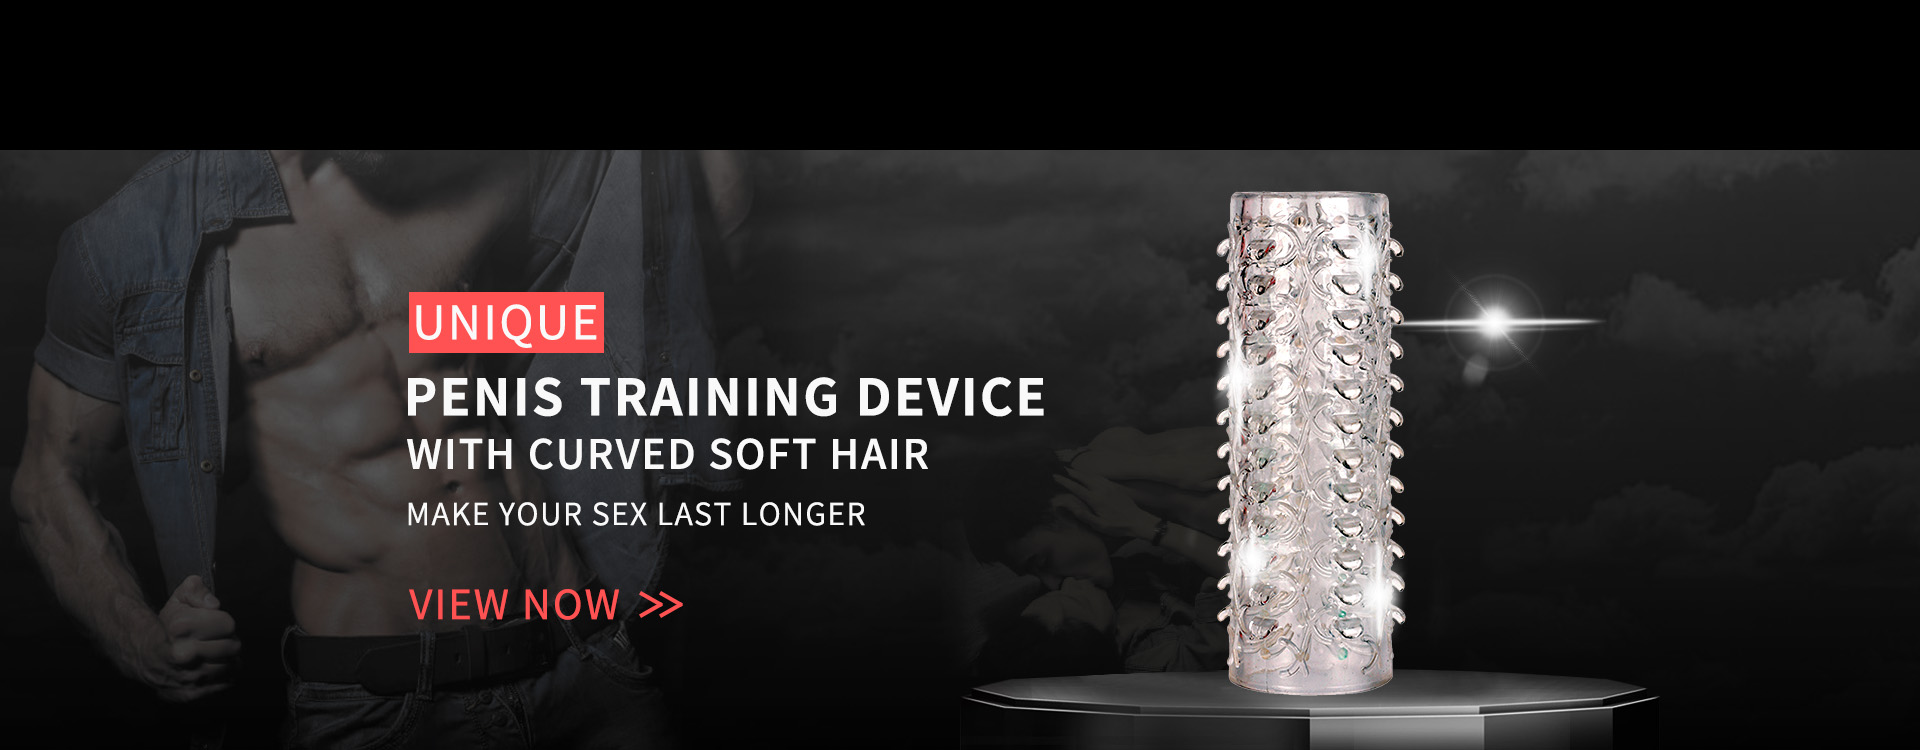 Unique penis training device with curved soft hair